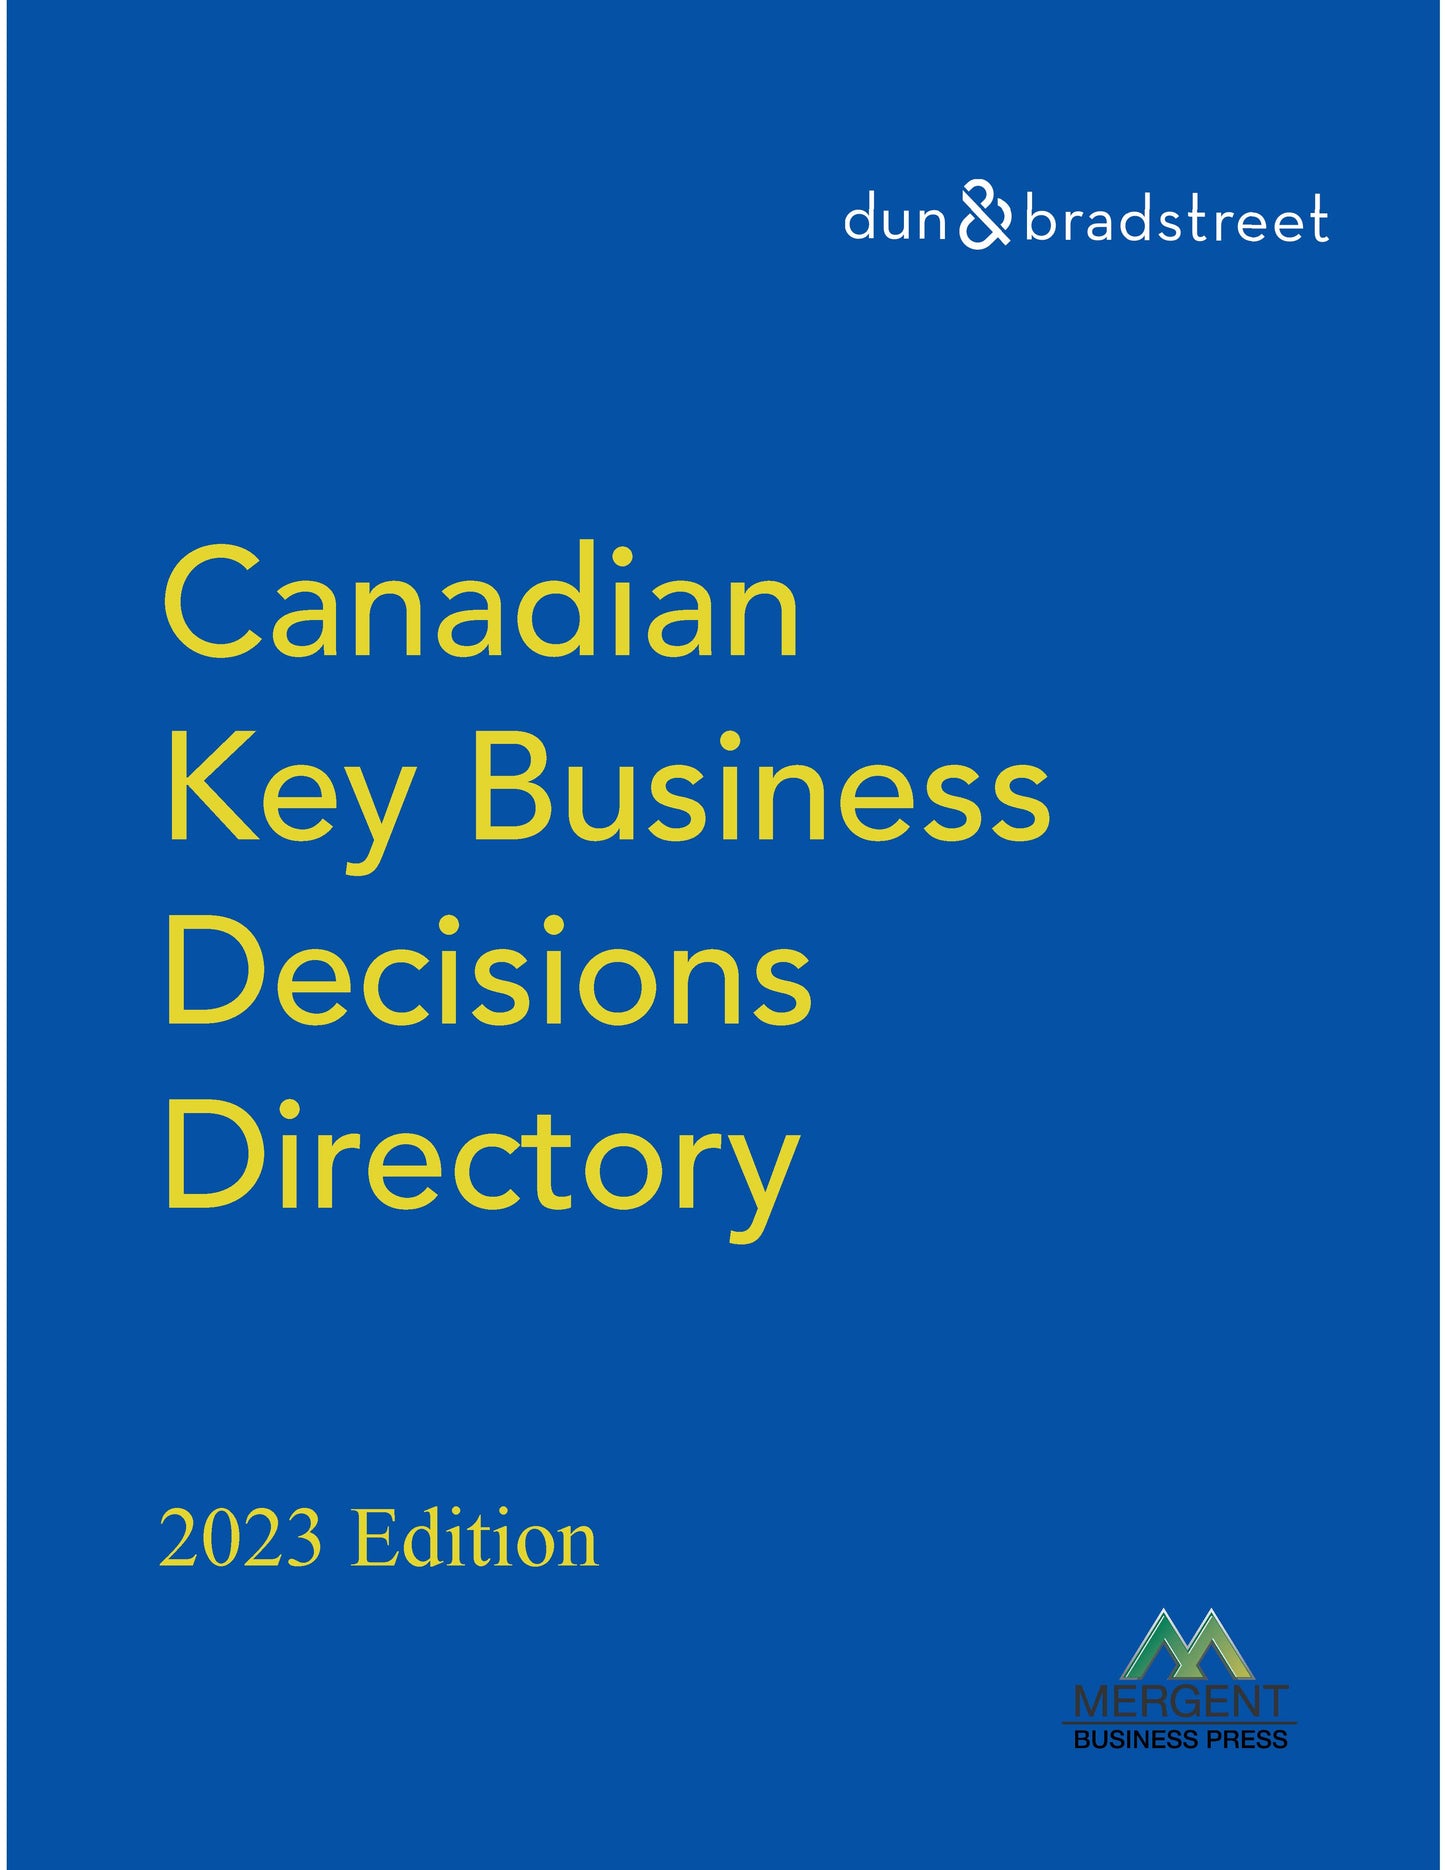 Canadian Key Business Decisions Directory